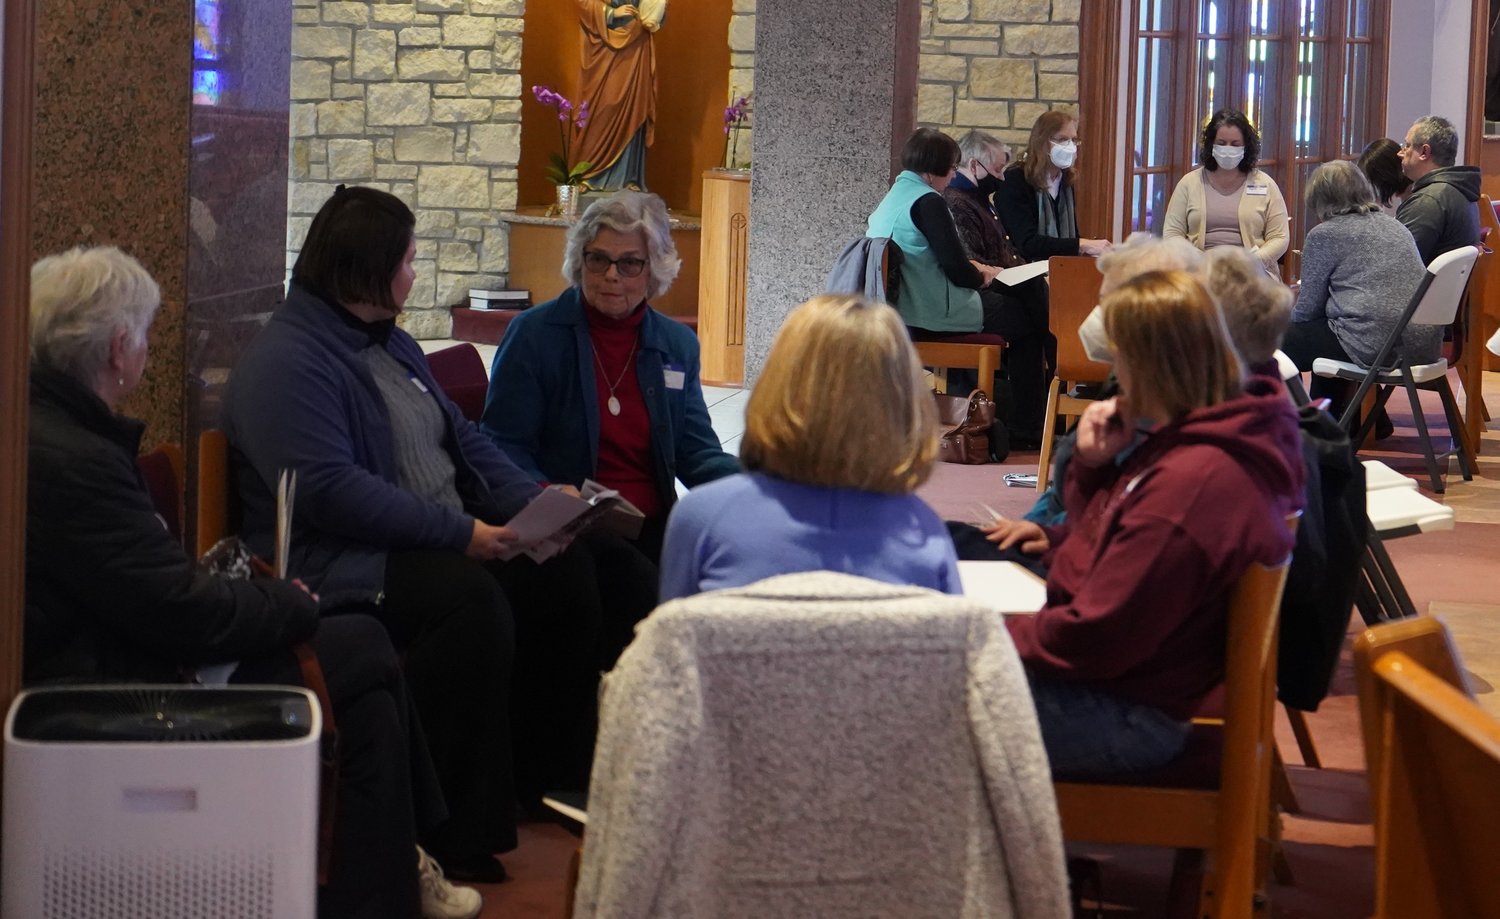 Two of the discussion groups participating in the Columbia listening session for the Synod of Bishops gather in circles in Our Lady of Lourdes Church.